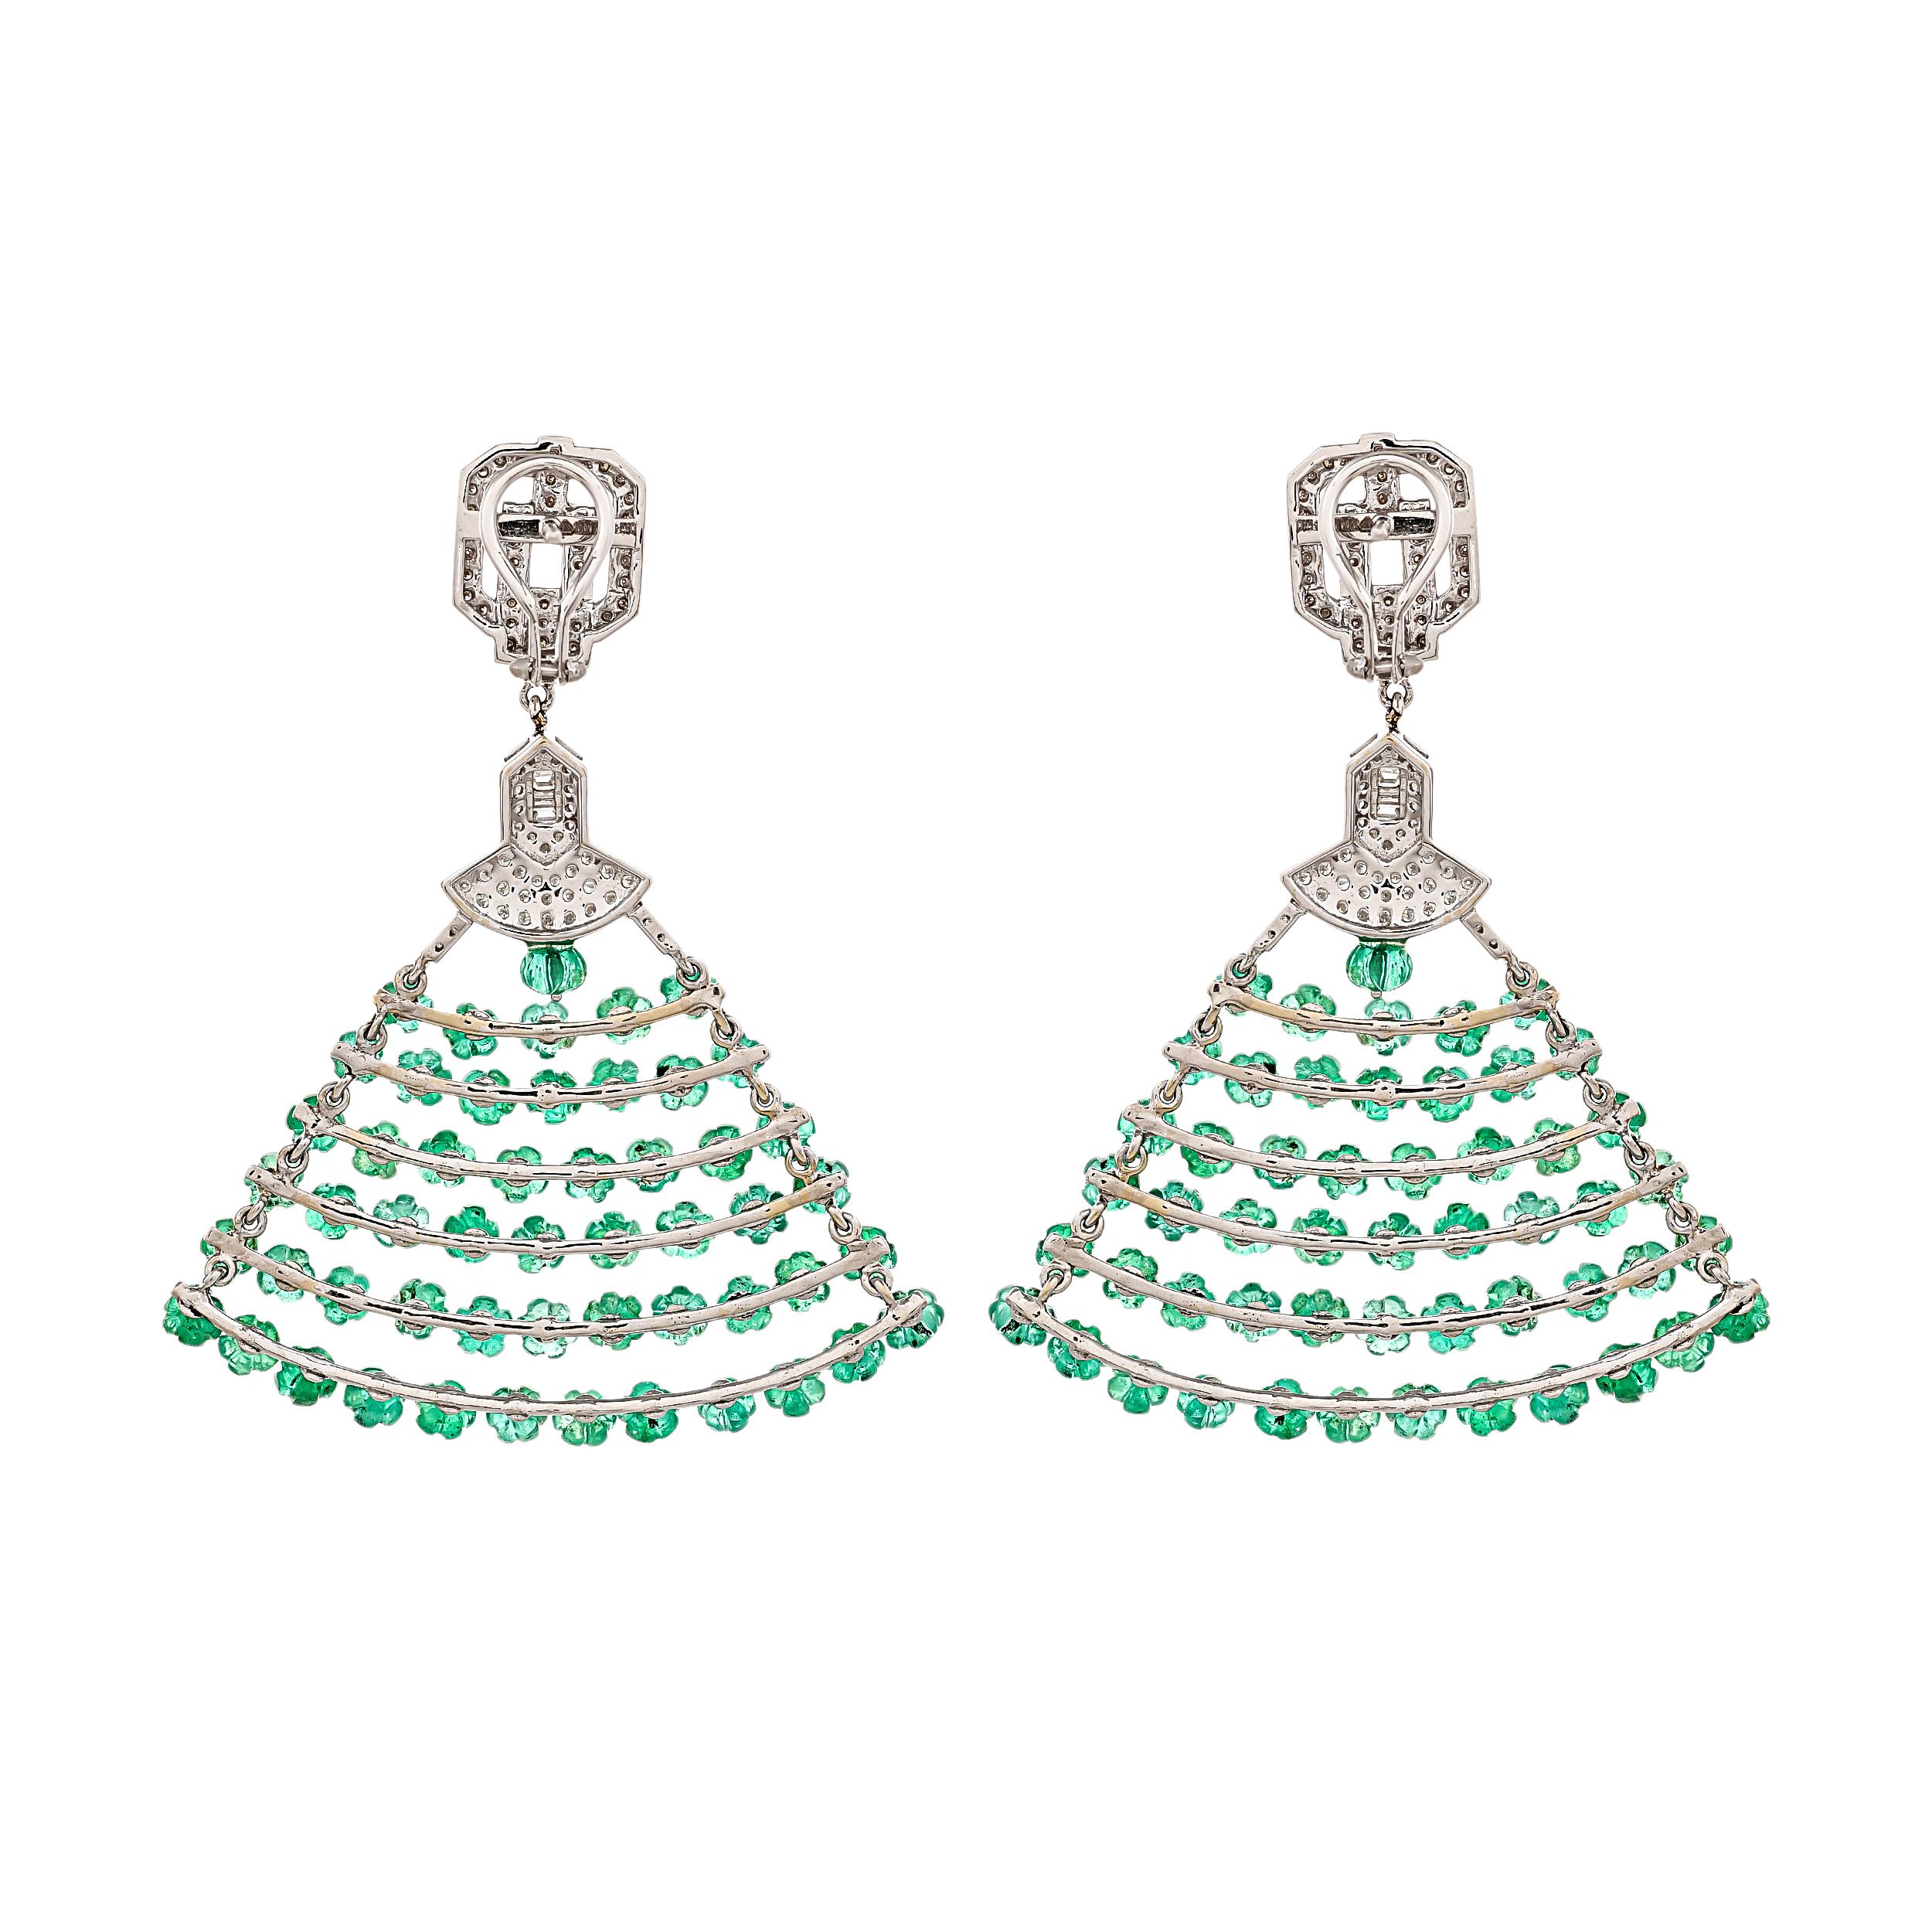 Modern 37.71 Carat Emerald Melon Beads and Diamond 18kt White Gold Earrings For Sale